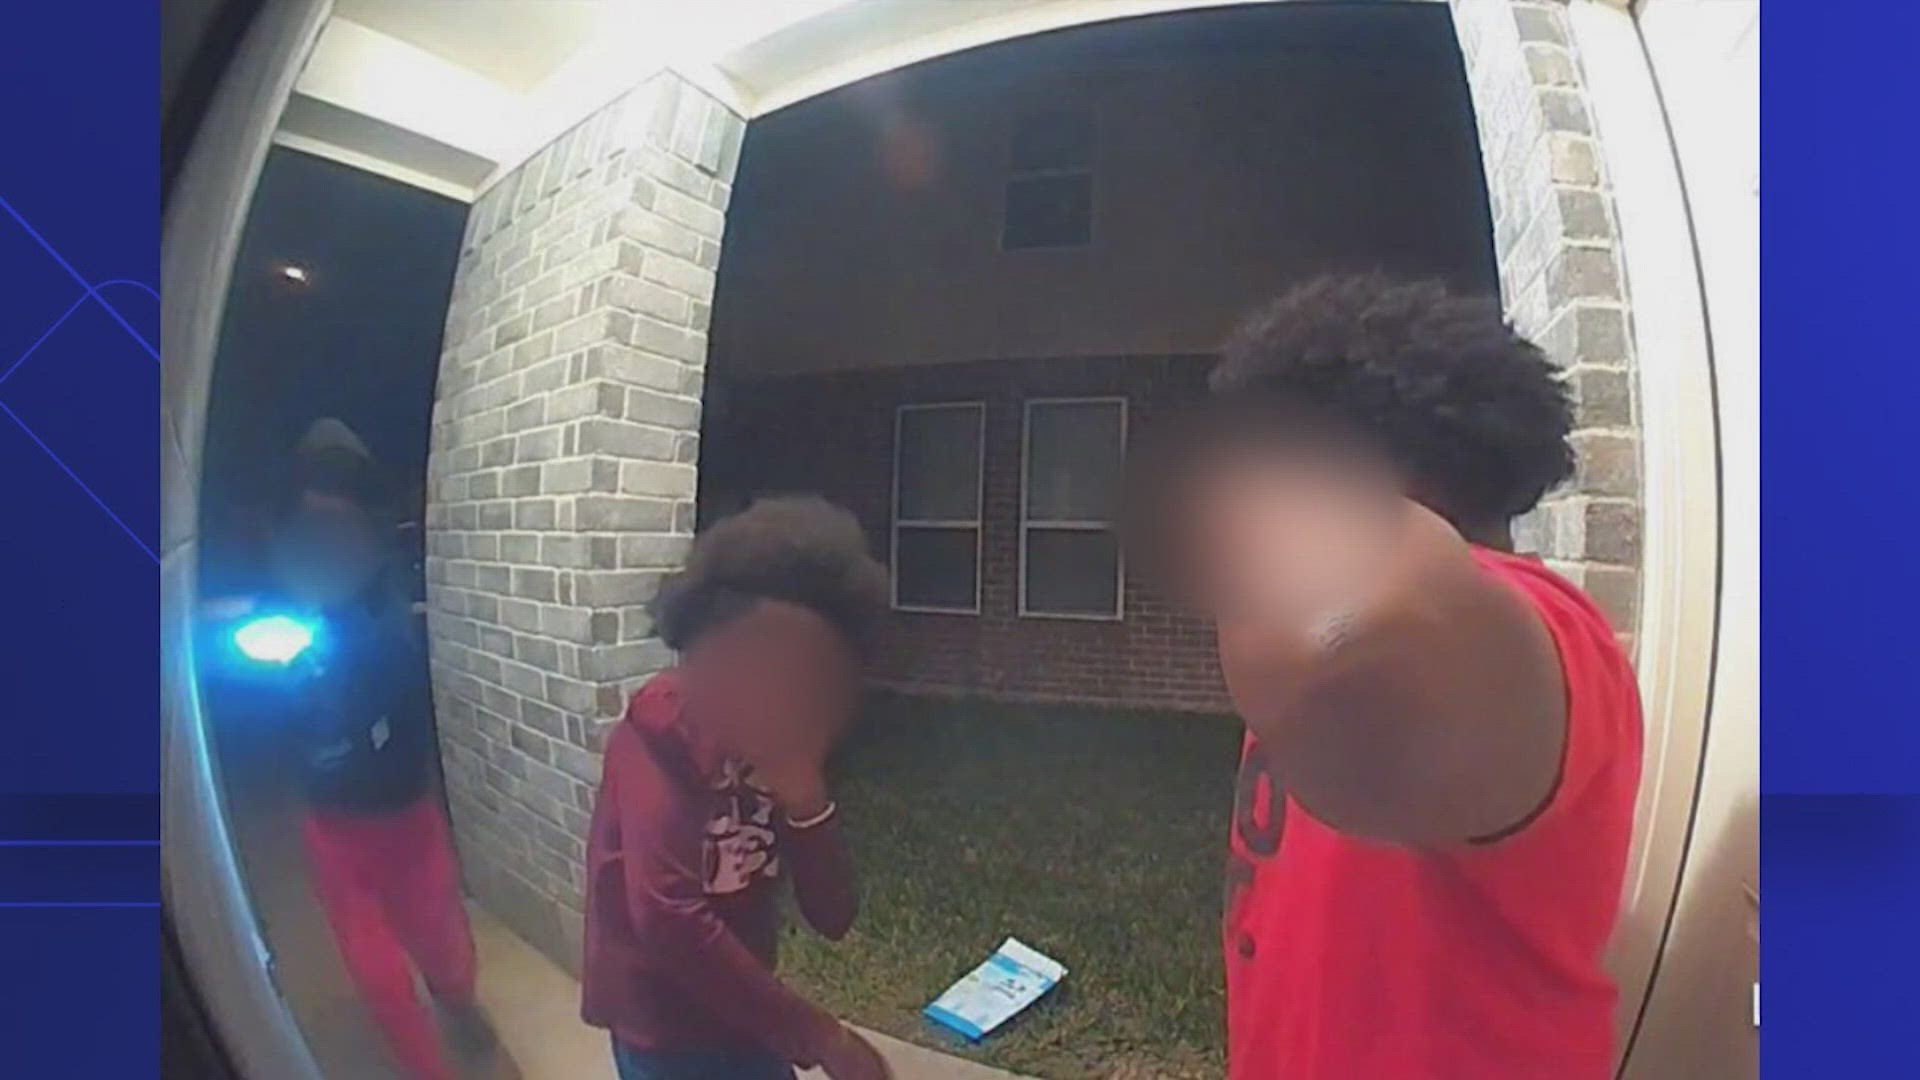 Residents of a Cypress neighborhood are frustrated after they said kids and teenagers have been going around, kicking doors as part of a TikTok challenge.